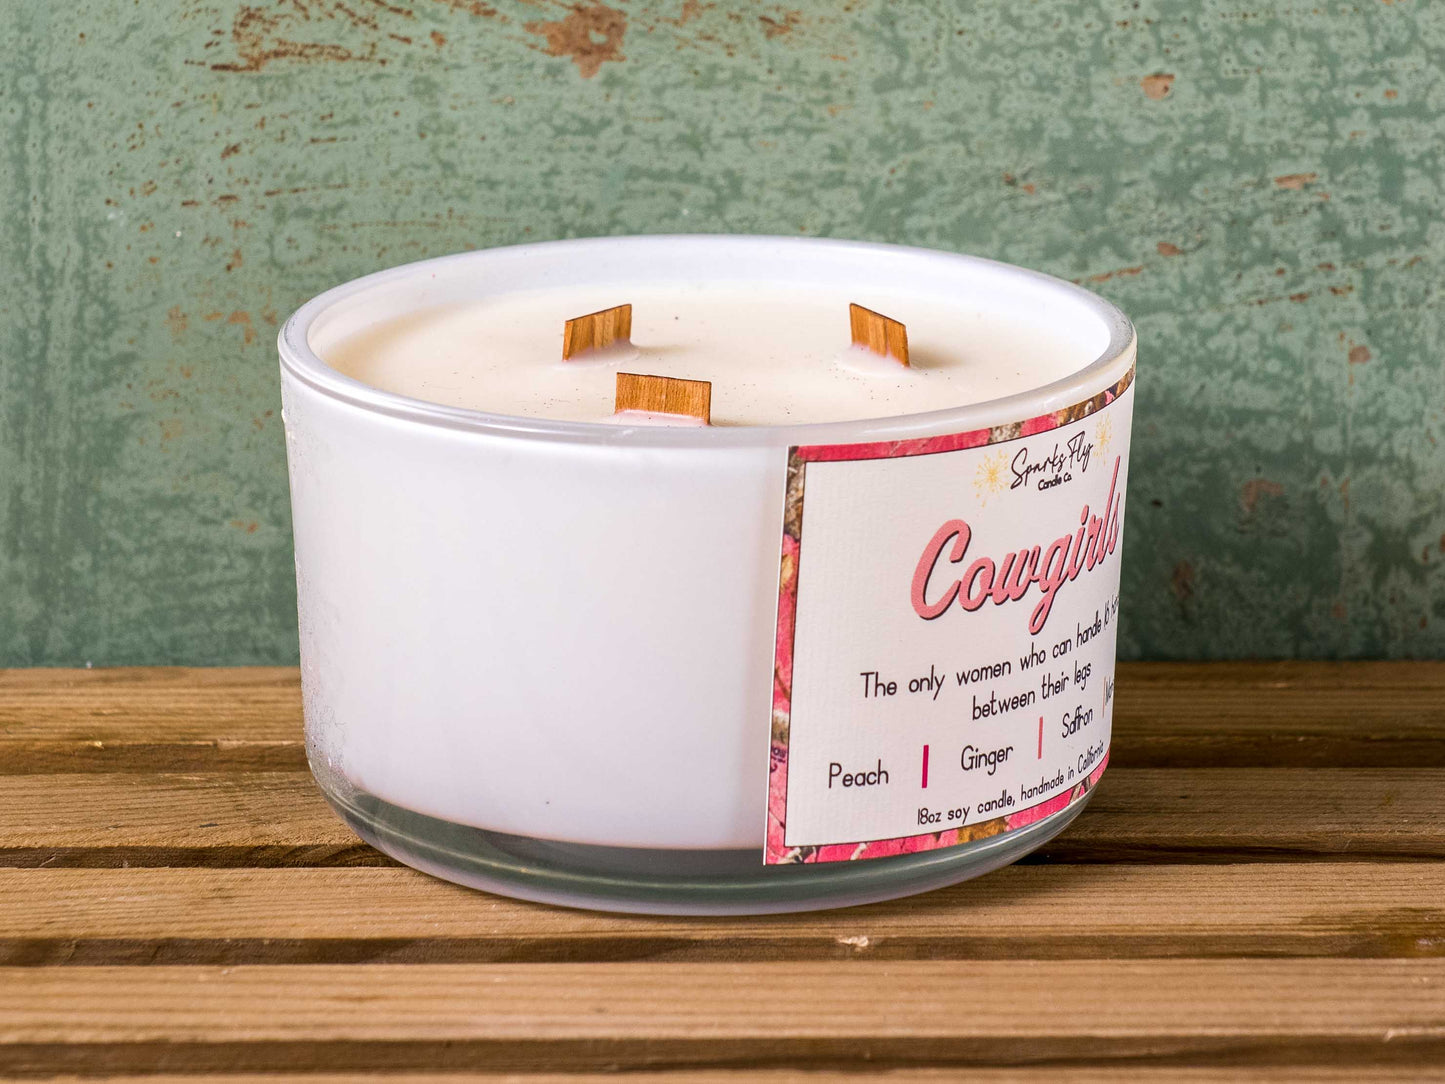 Cowgirls: The only women who can handle 16 hands between their legs!   Soy Candle